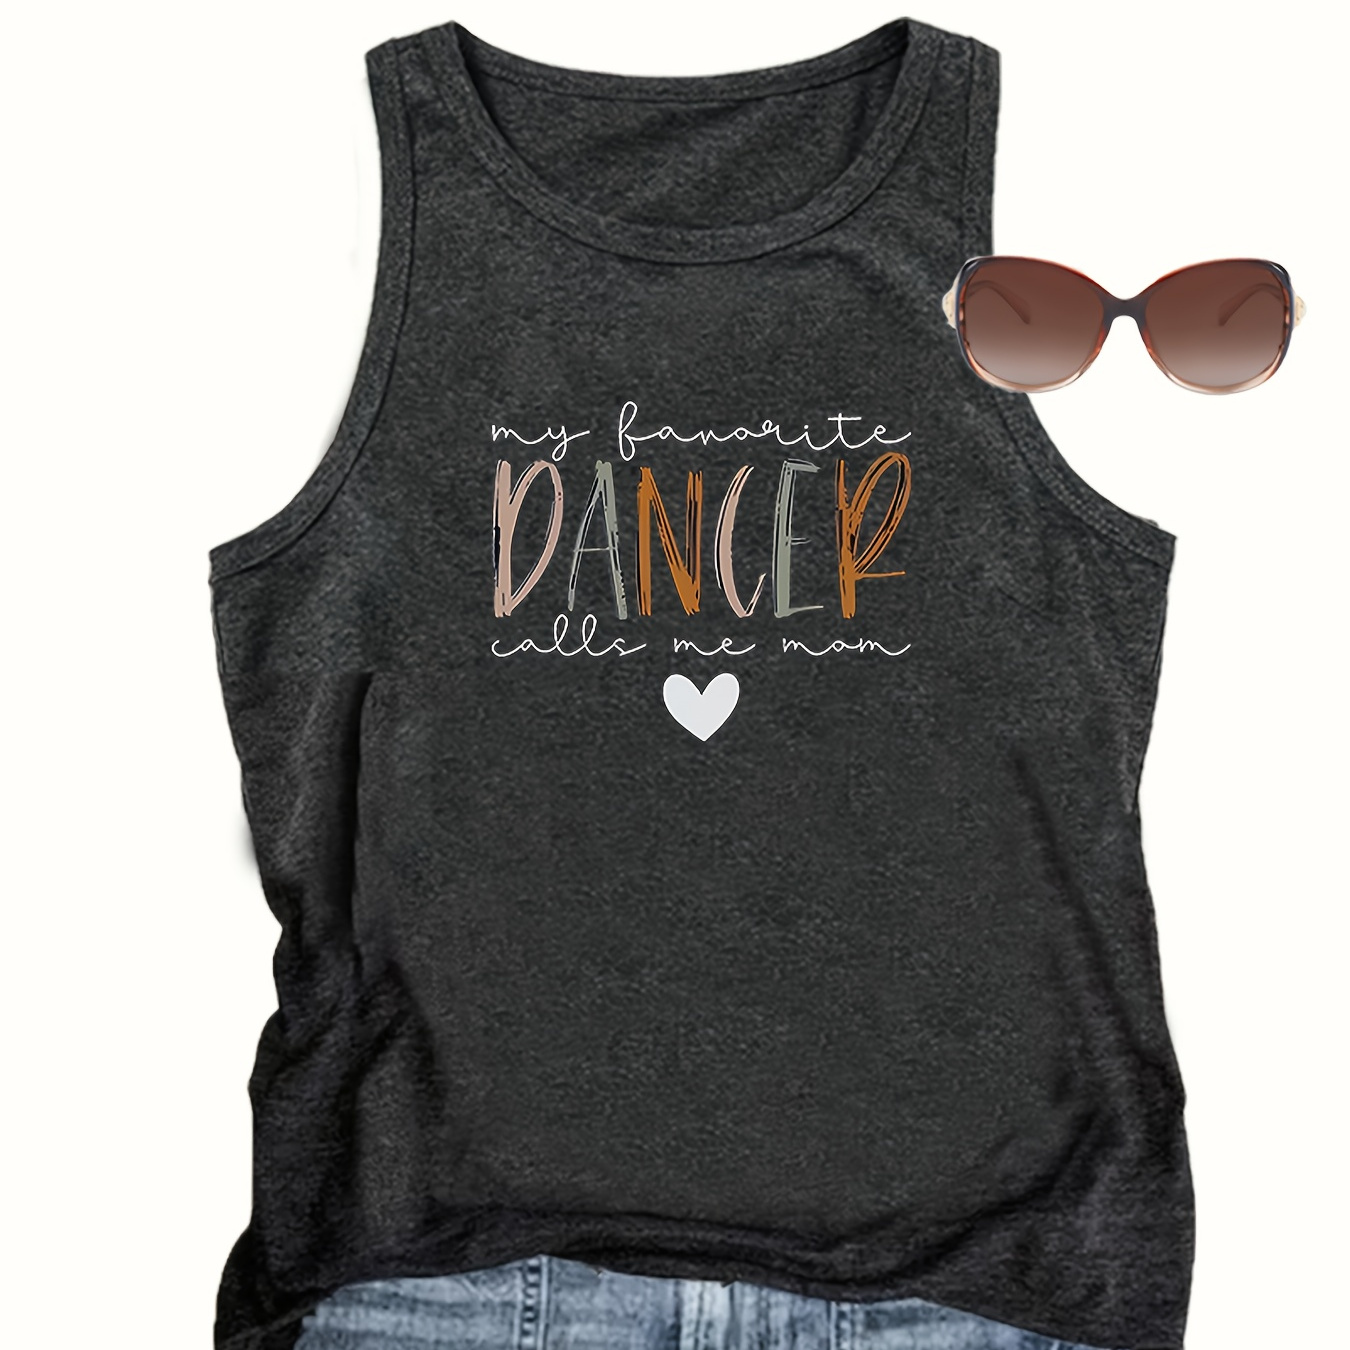 

Dancer Print Crew Neck Tank Top, Casual Sleeveless Top For Summer & Spring, Women's Clothing